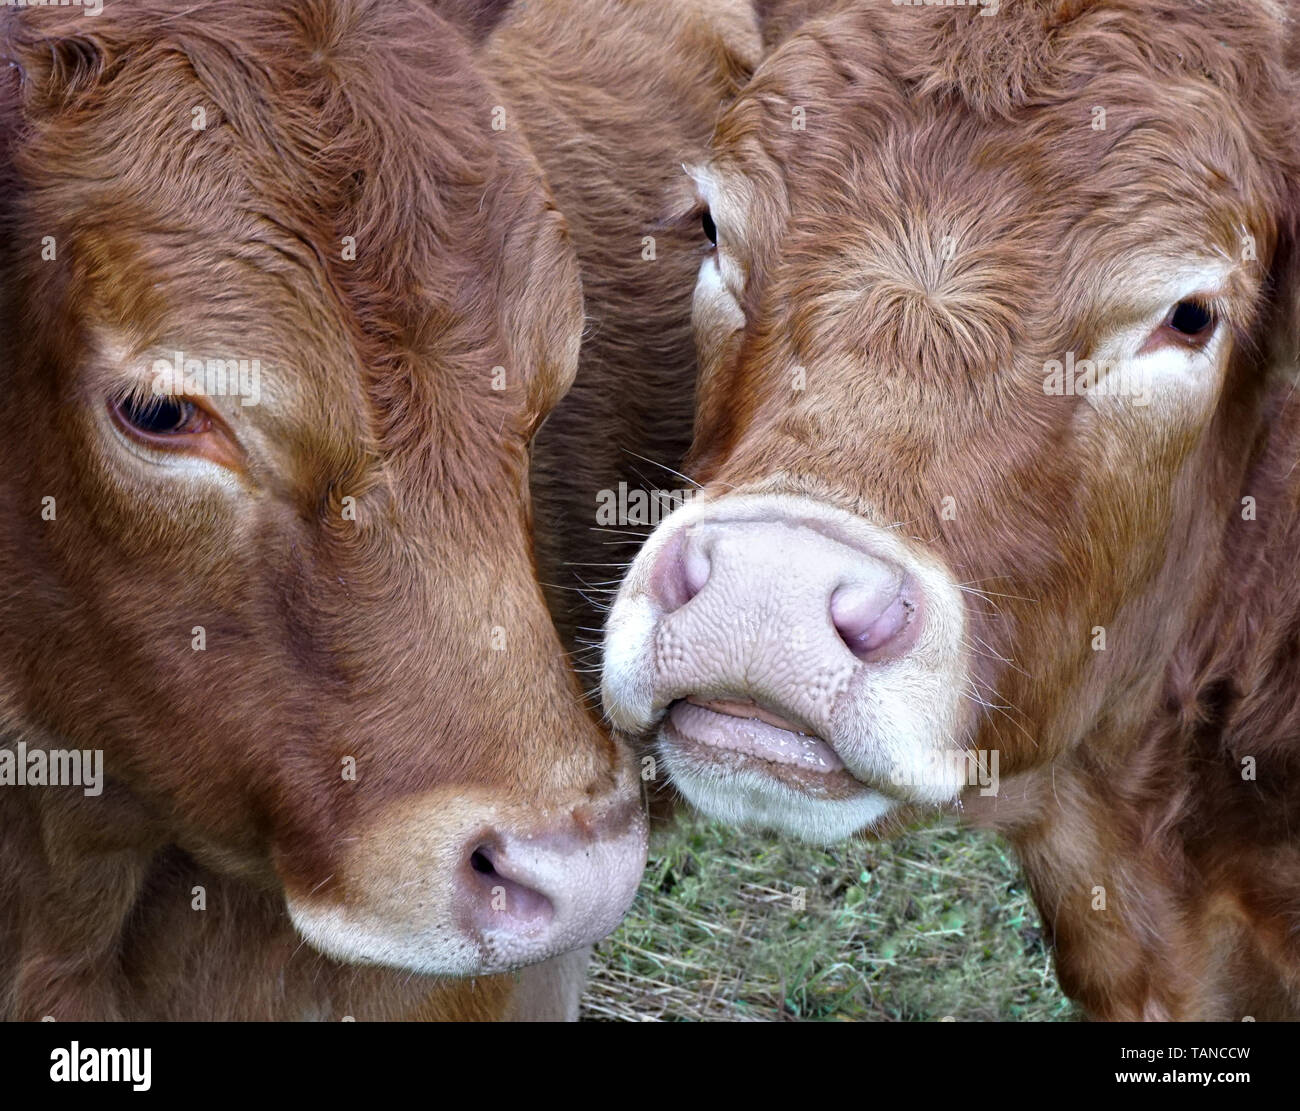 close up of two cows looking at camera Stock Photo